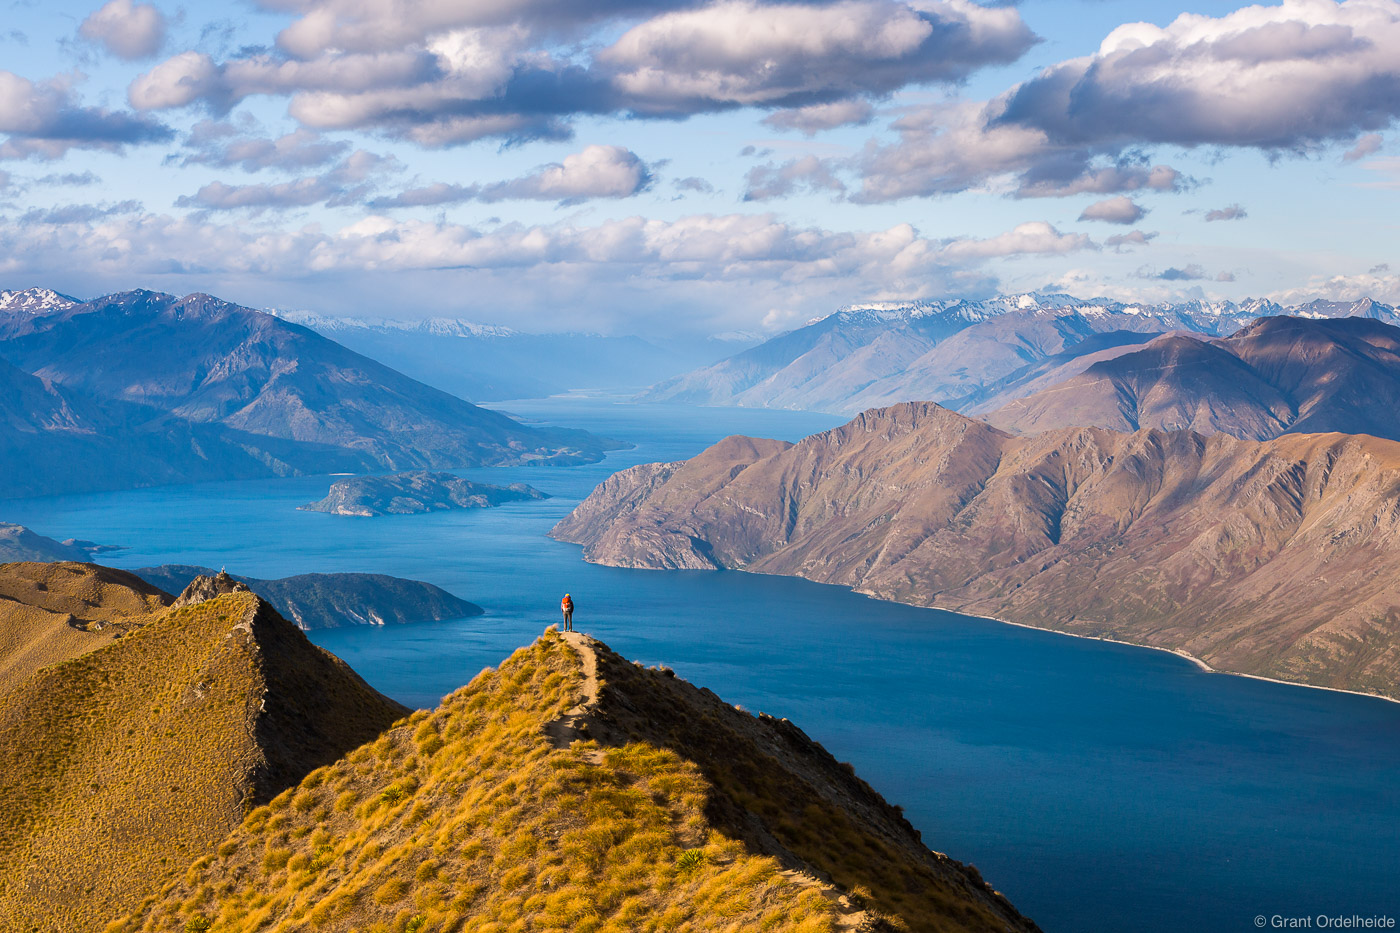 A hiker on the trail up Roy's Peak high above Lake Wanaka on New Zealand's South Island.